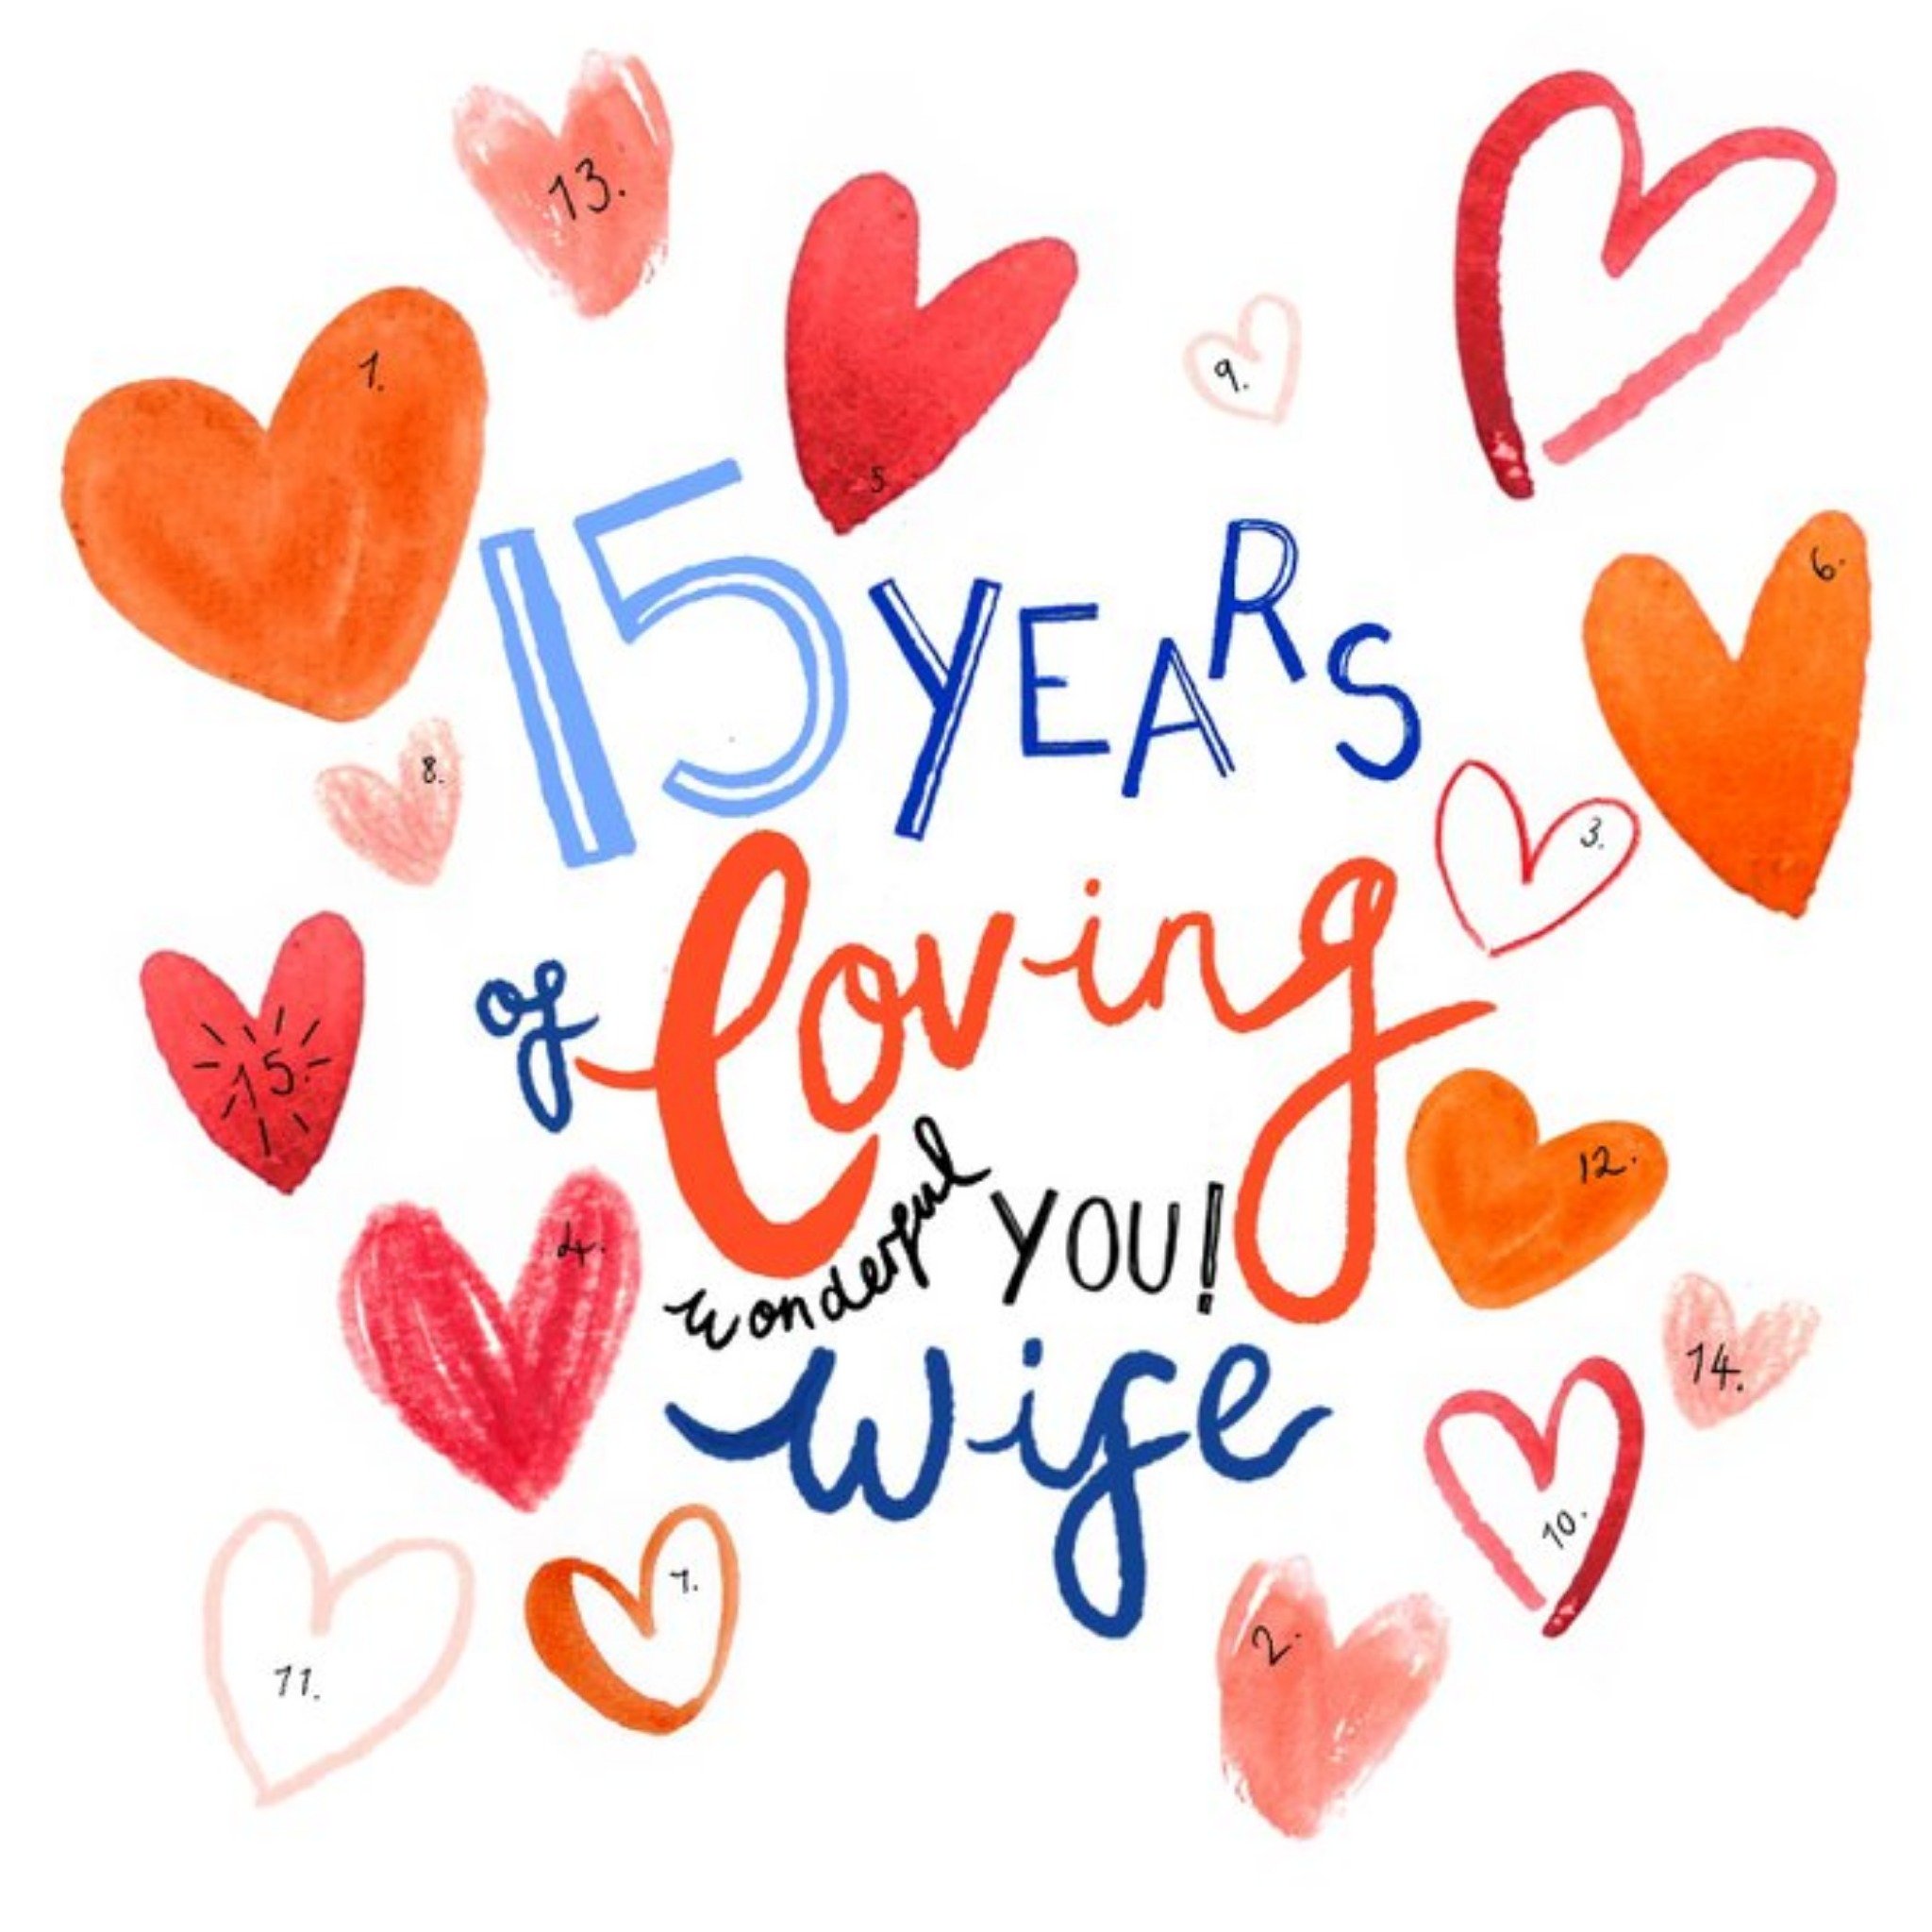 Katie Hickey Illustrated 15th Anniversary Wife Love Hearts Card, Large